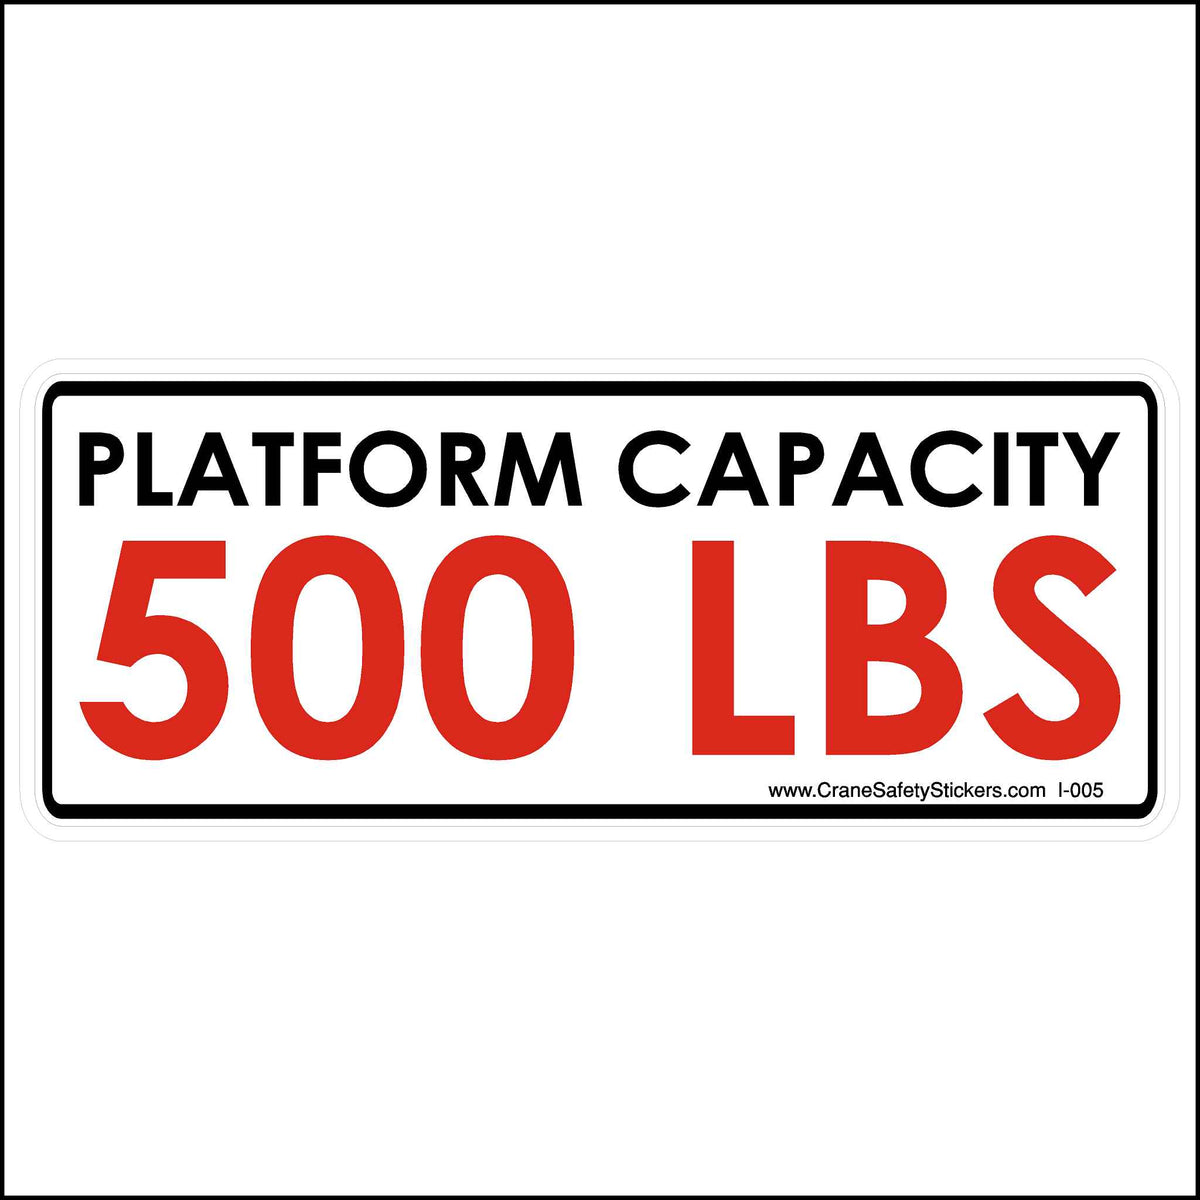 Platform Capacity sticker printed with. Platform Capacity 500 LBS. black and red letters on a white background.